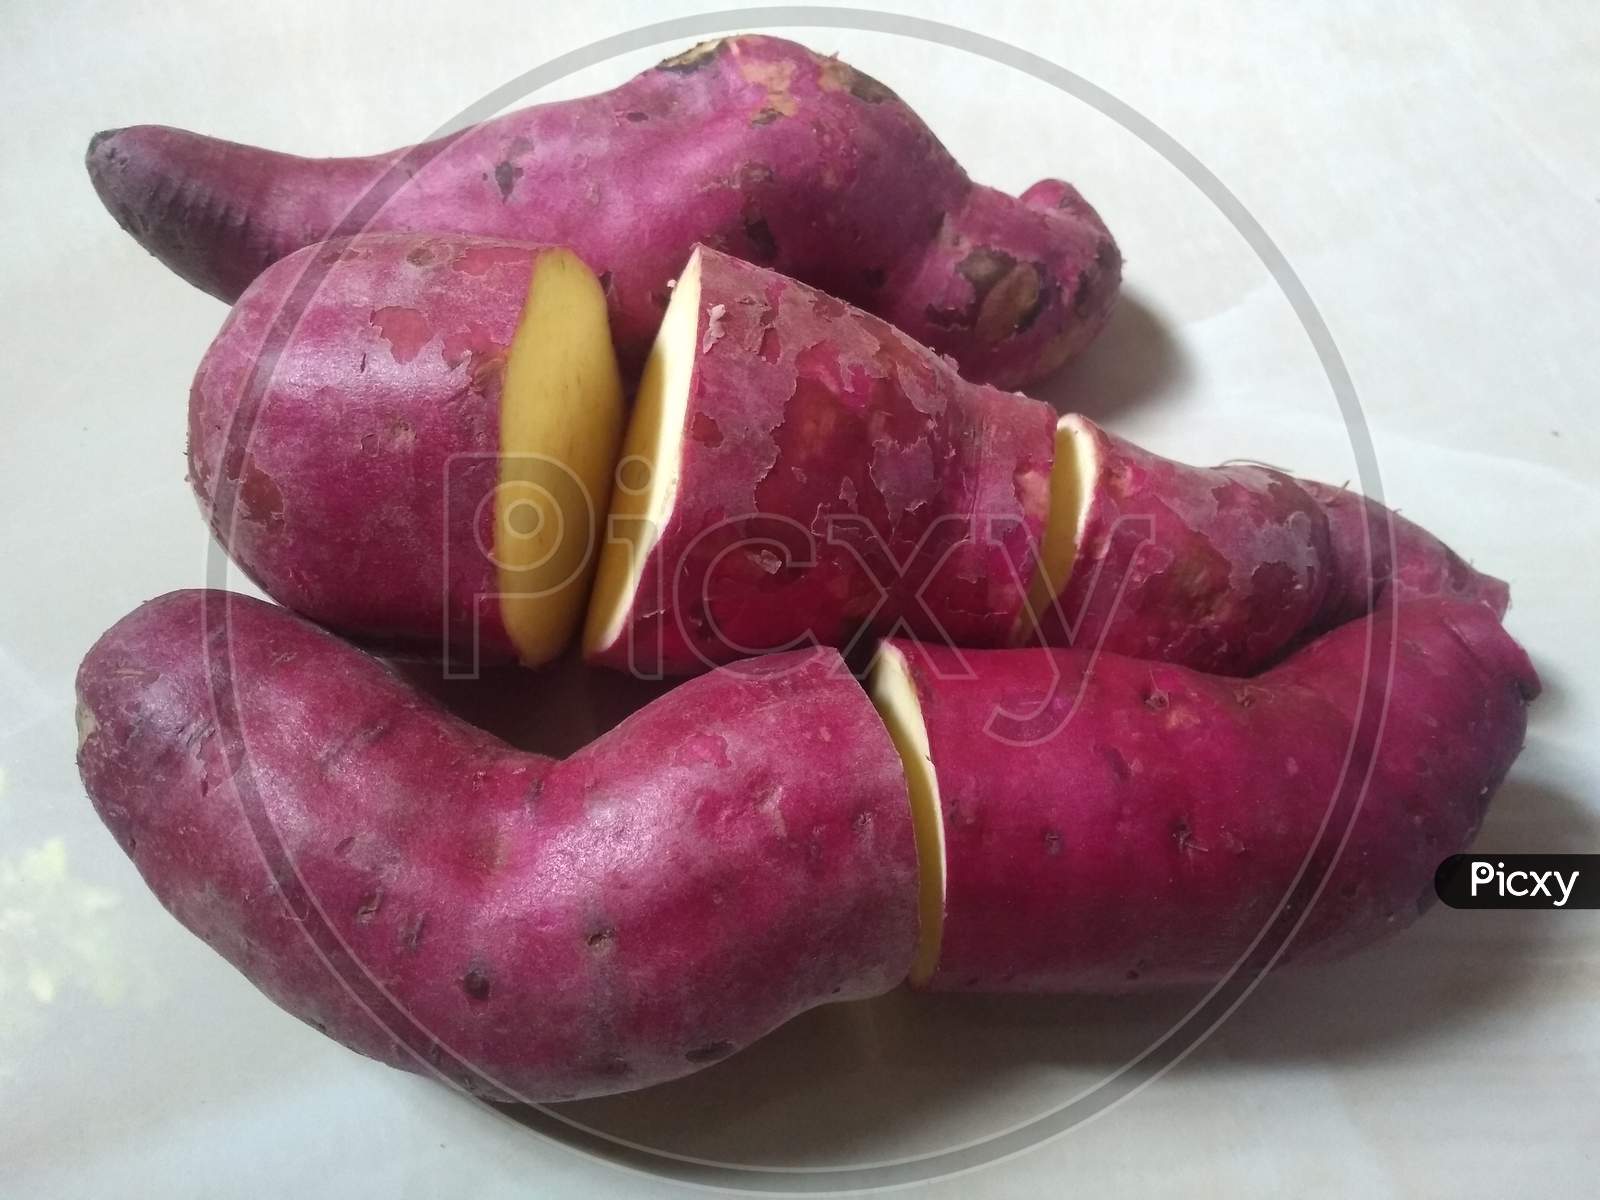 Sweet Pink Potatoes On The White Background Close Up Photo